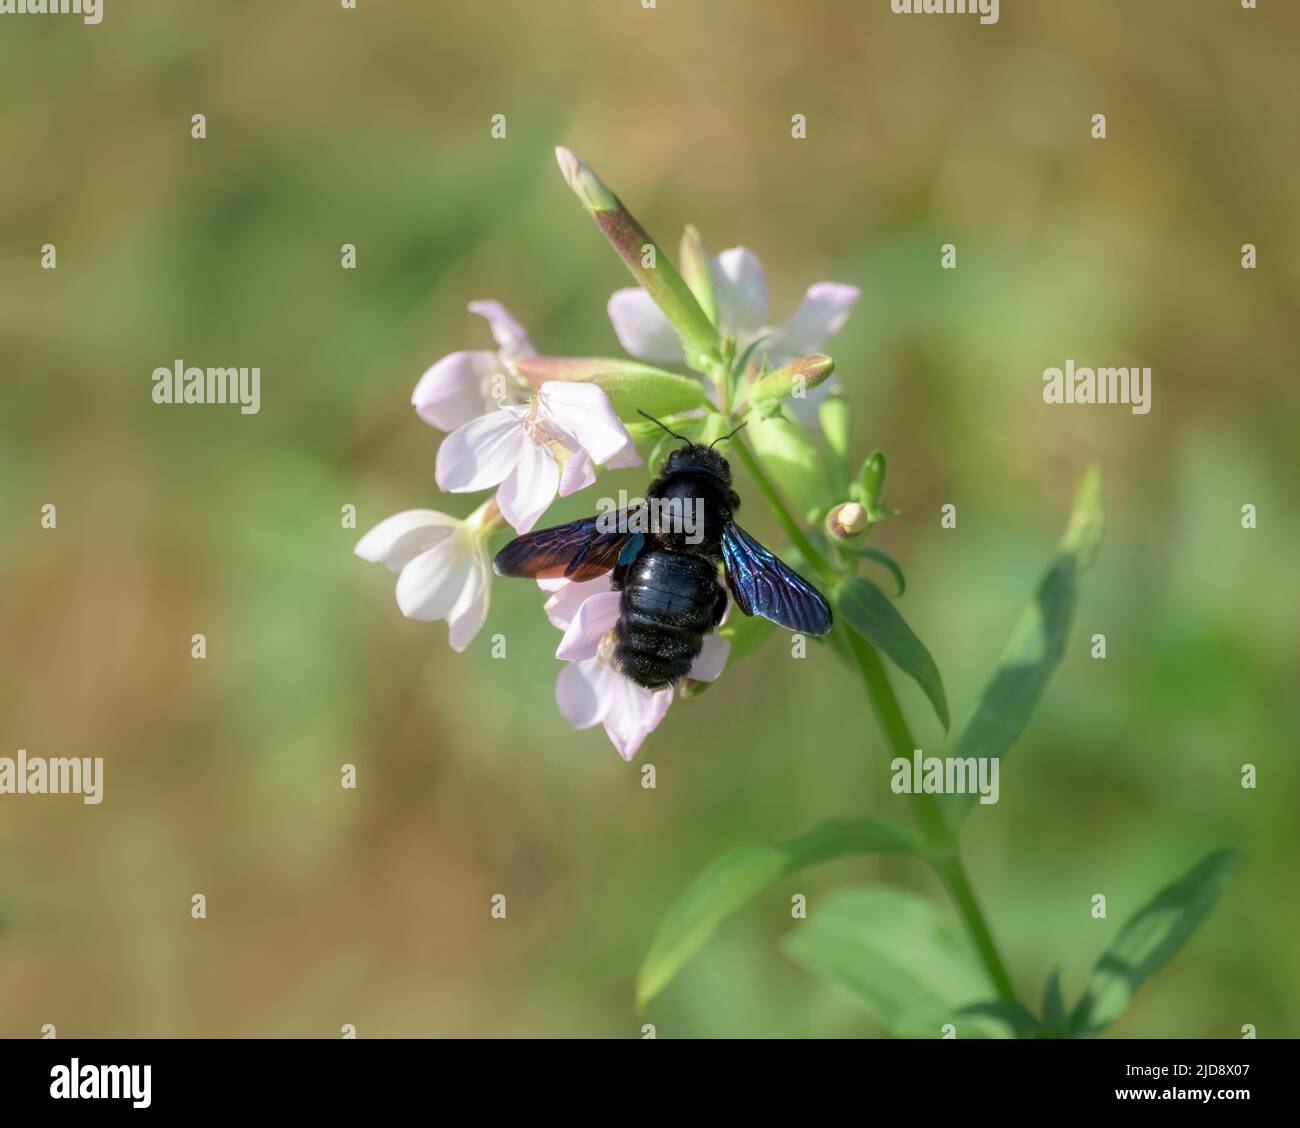 A violet European carpenter bee, Xylocopa violacea, in flight and soaking up nectar of the wildflower common soapwort, Saponaria officinalis, Germany Stock Photo